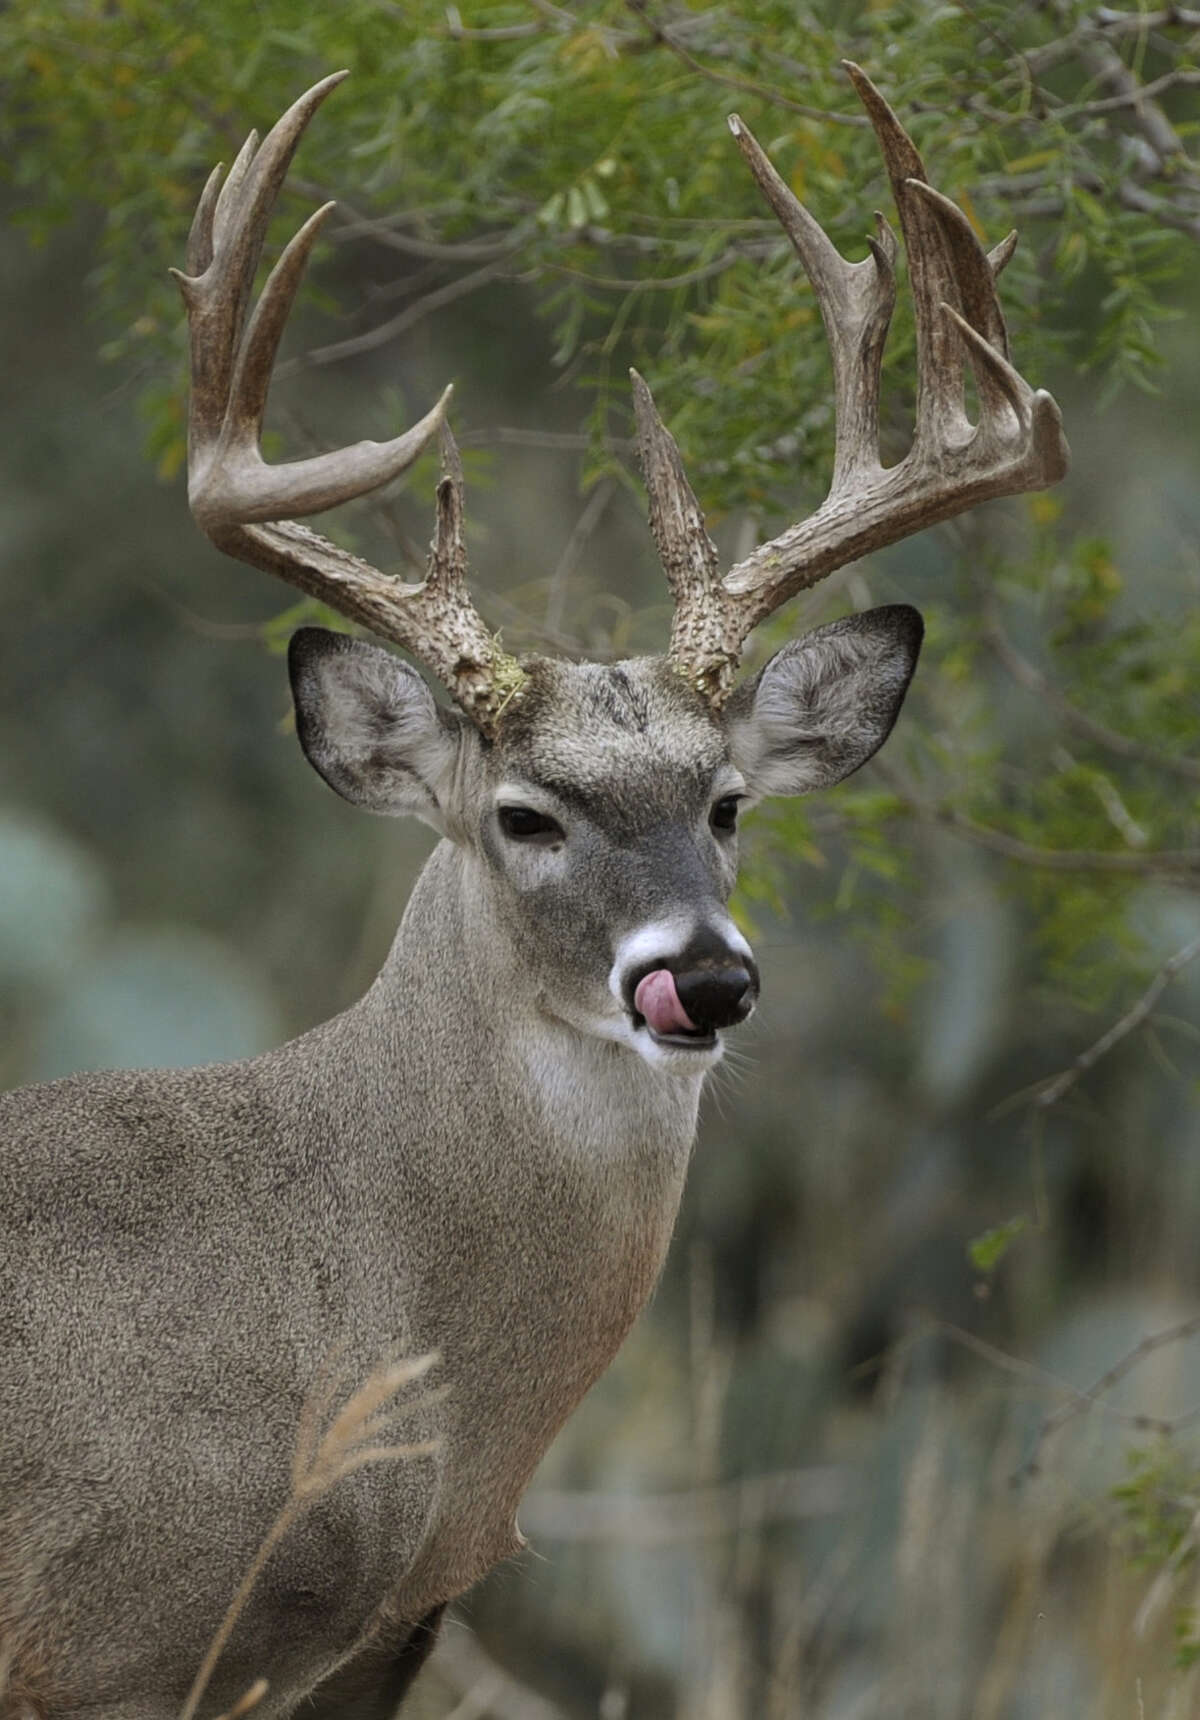 A 12-year study measuring antlers of 30,000 whitetail bucks taken by hunters indicates 41/2-year-old bucks in South Texas' brush country and East Texas' Piney-woods have slightly larger antlers, on average, than 41/2-year-old bucks from other regions of the state. ﻿